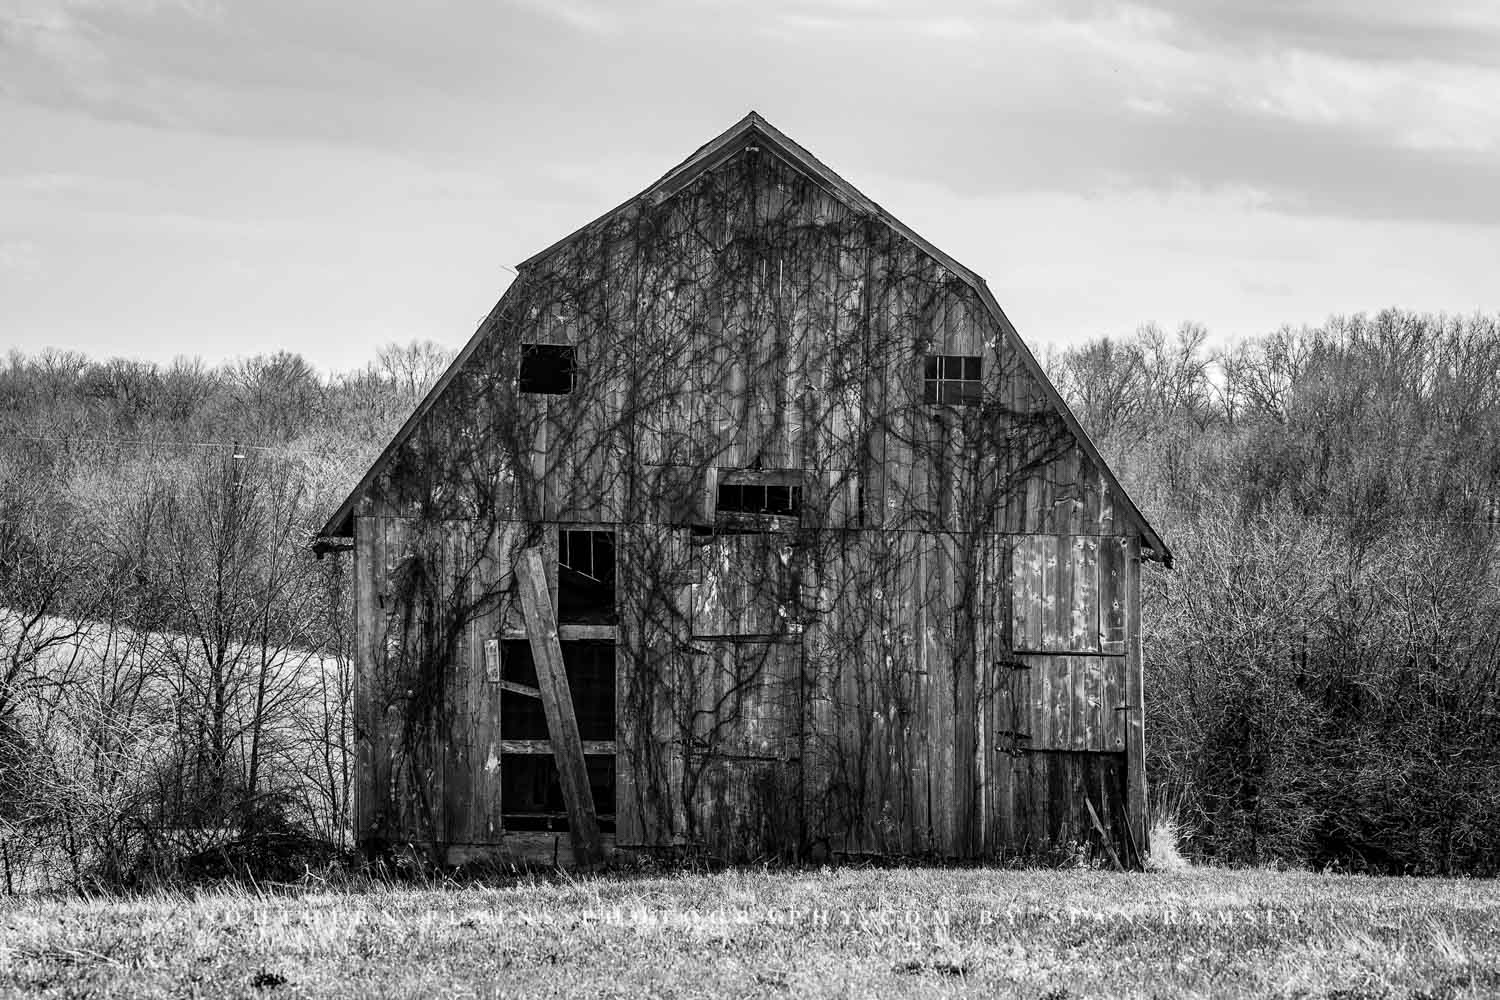 Black and white photography print of an old barn covered in vines on an early spring day in Missouri by Sean Ramsey of Southern Plains Photography.